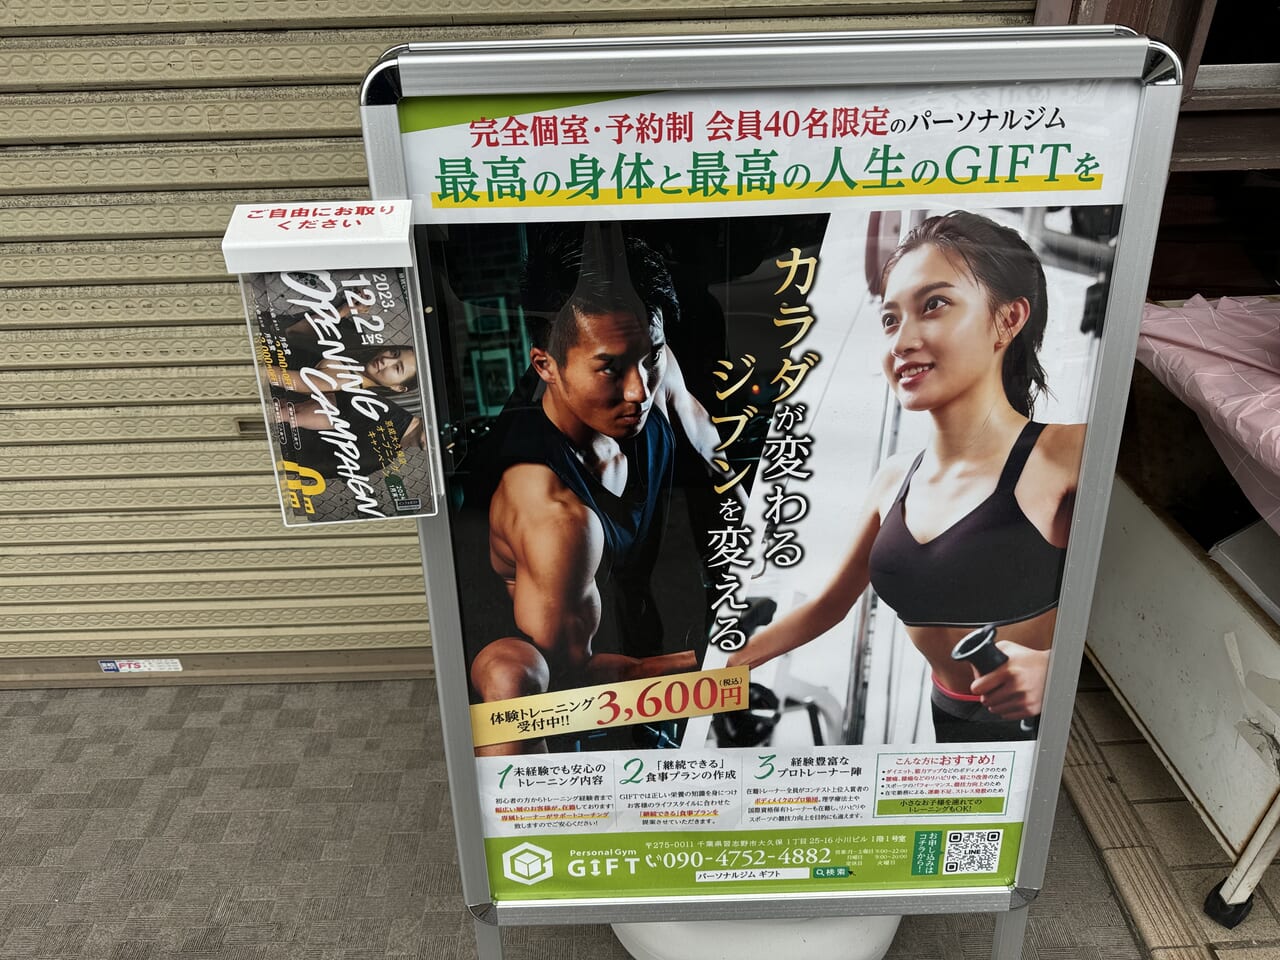 PersonalGymGIFT(パーソナルジムギフト)京成大久保店